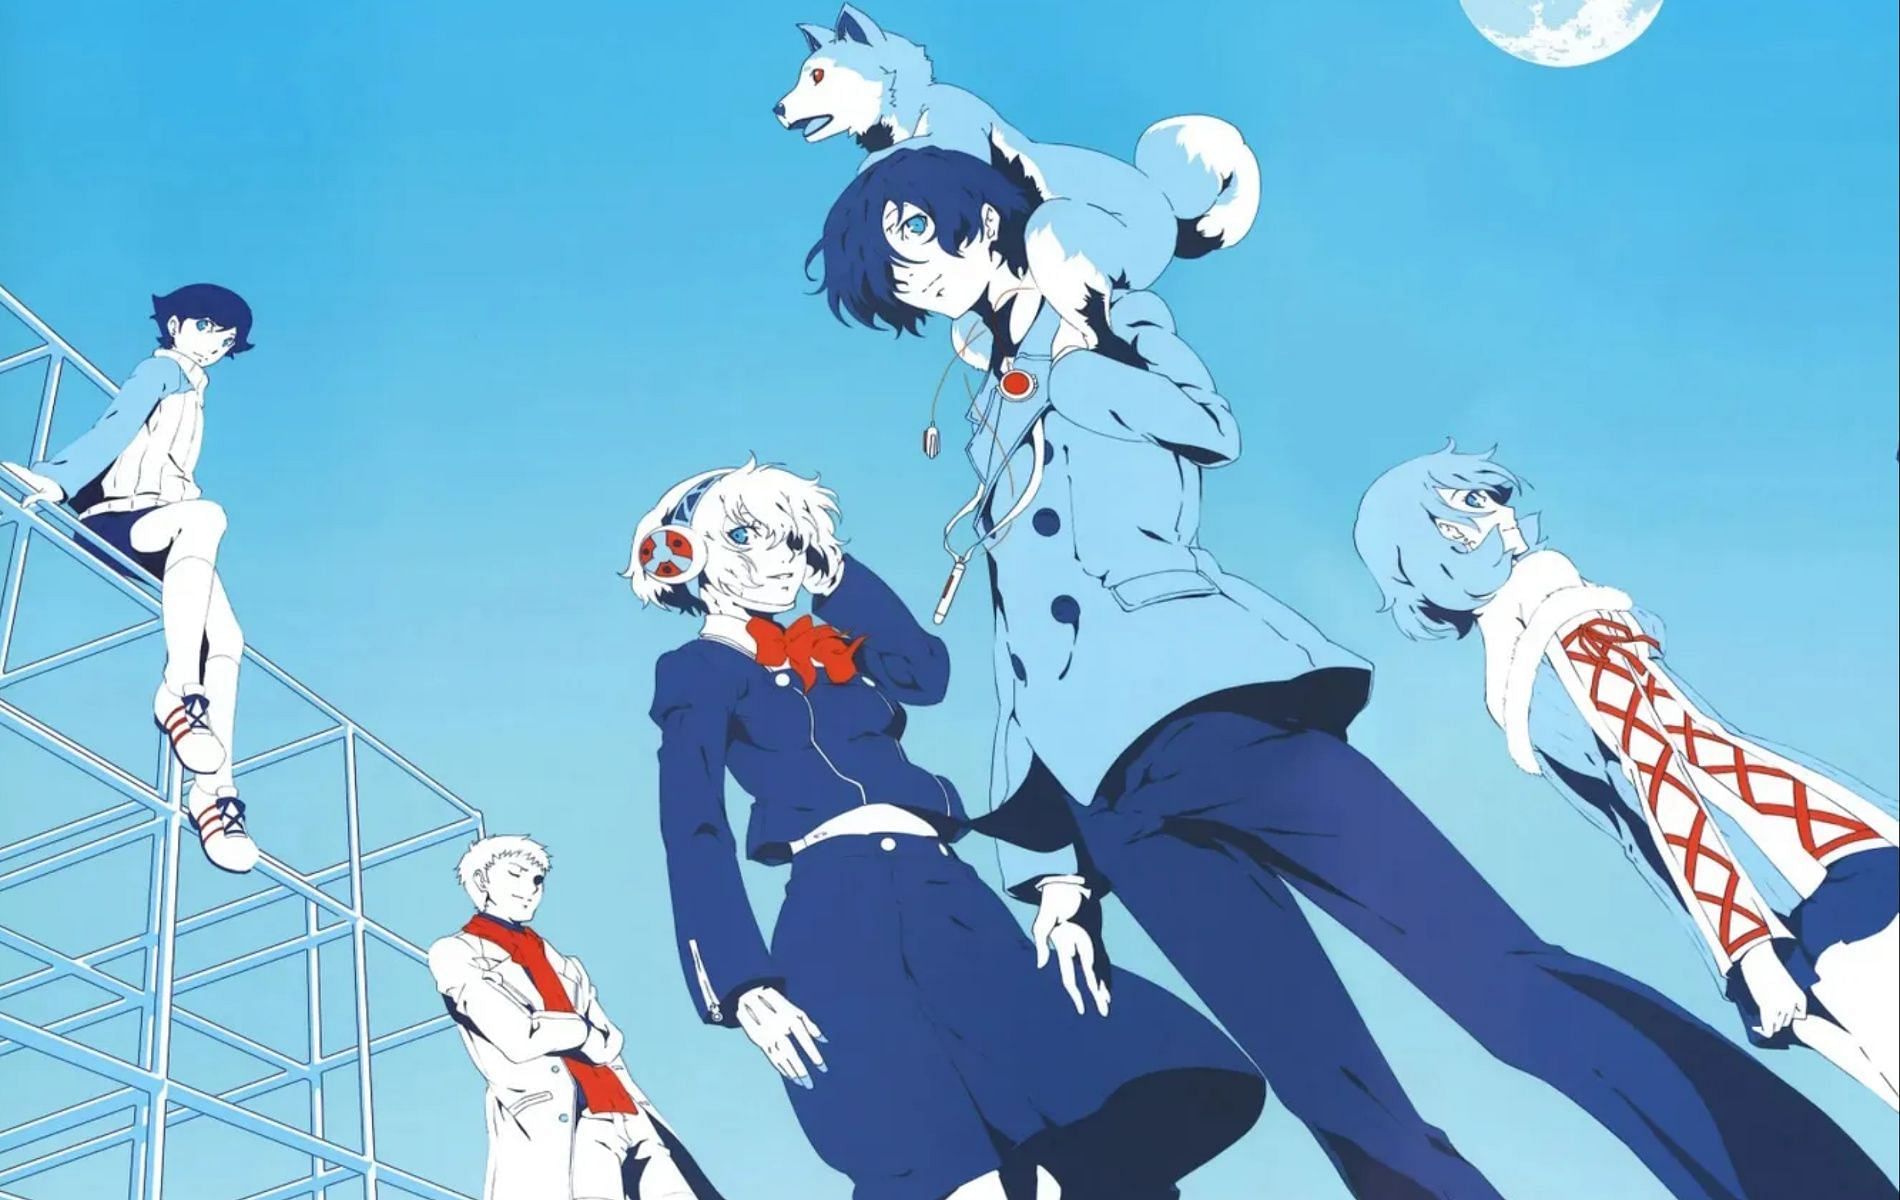 Persona 3 Reload leaked as the official title of rumored JRPG remake